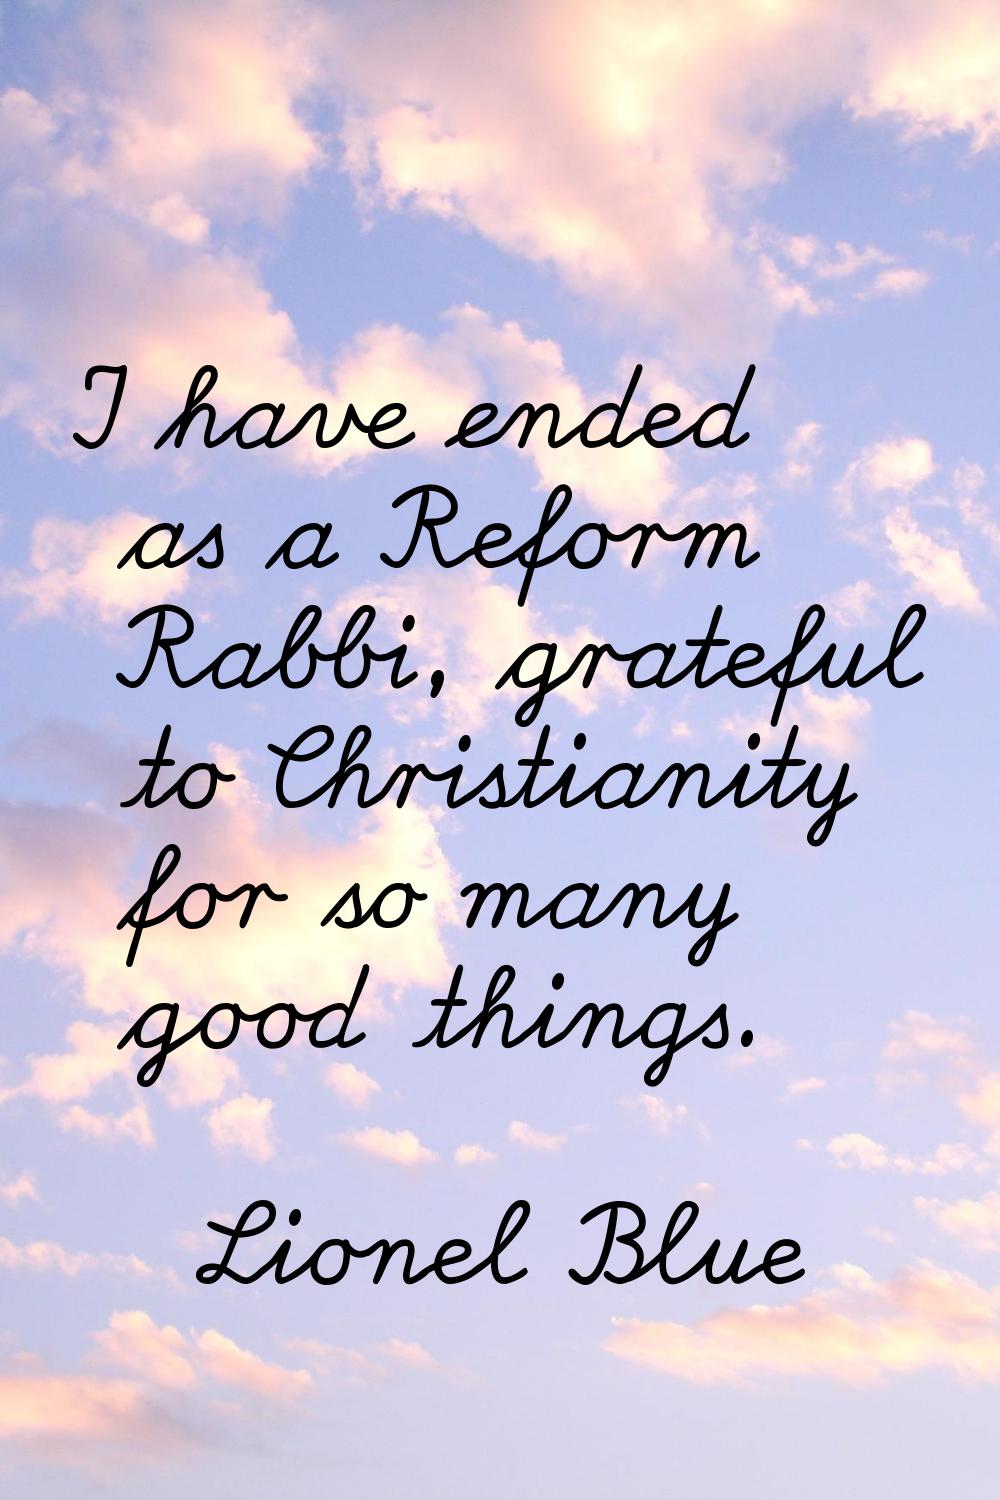 I have ended as a Reform Rabbi, grateful to Christianity for so many good things.